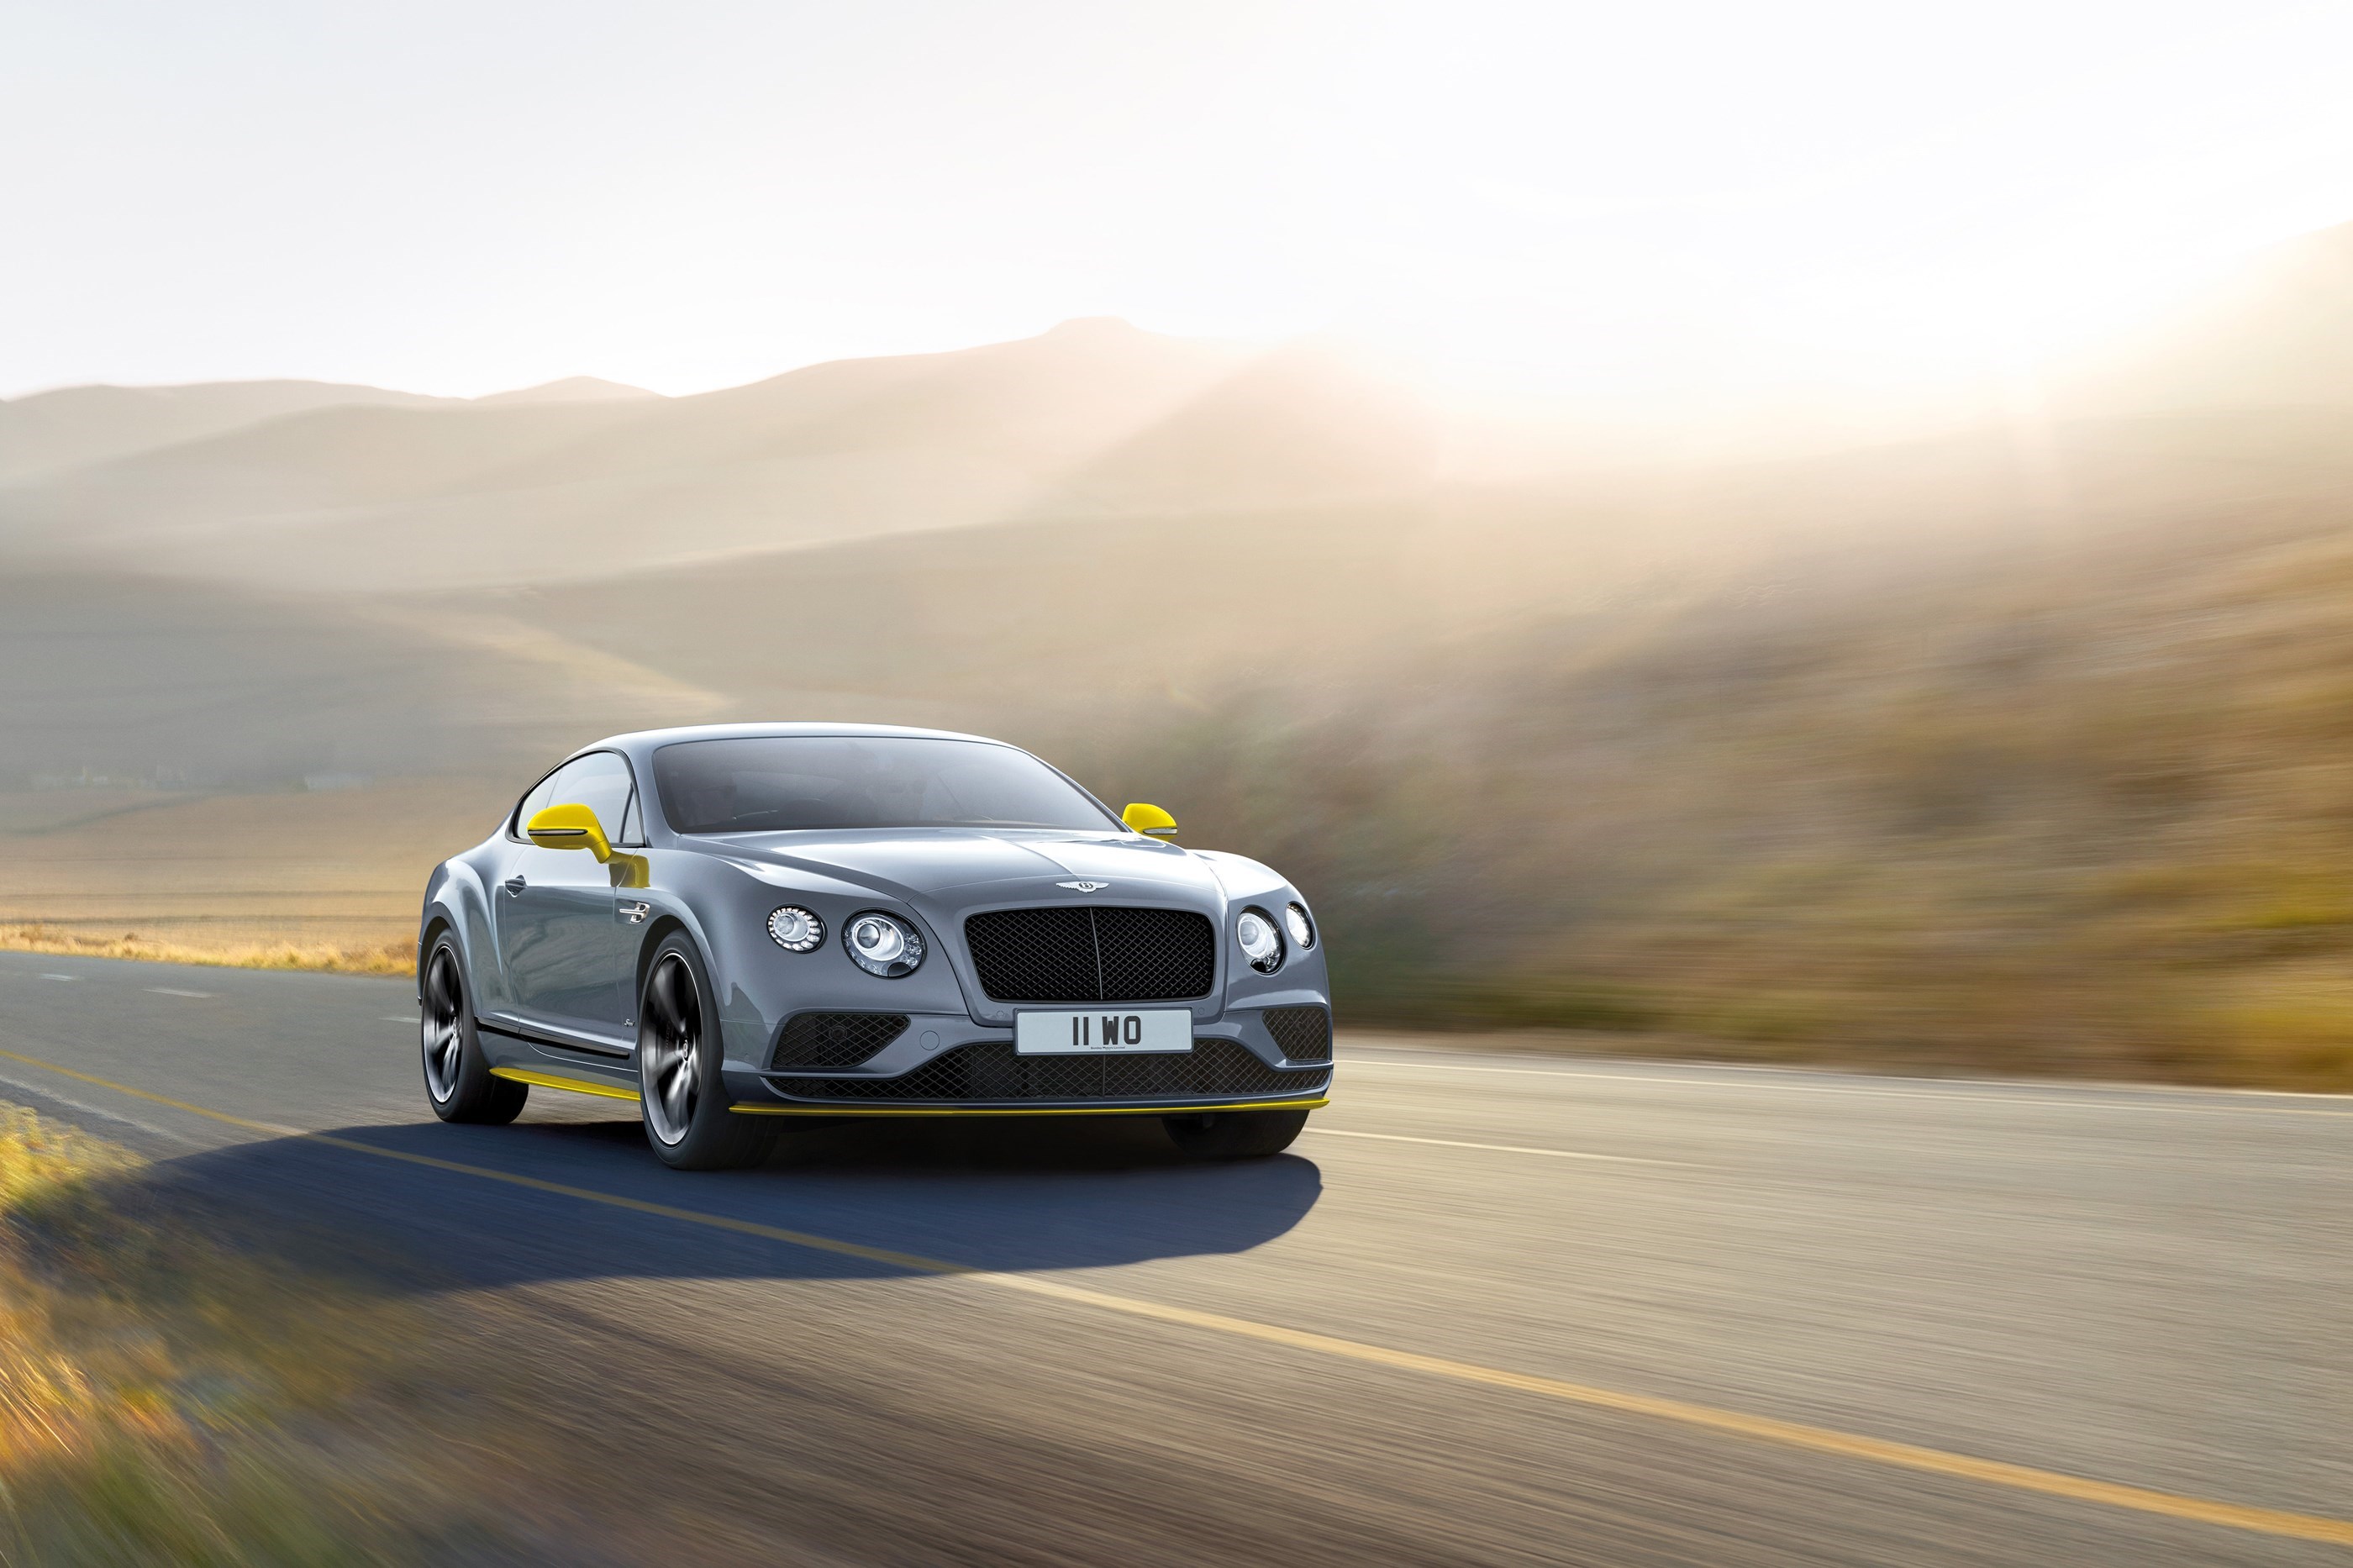 Continental GT Speed Black Edition